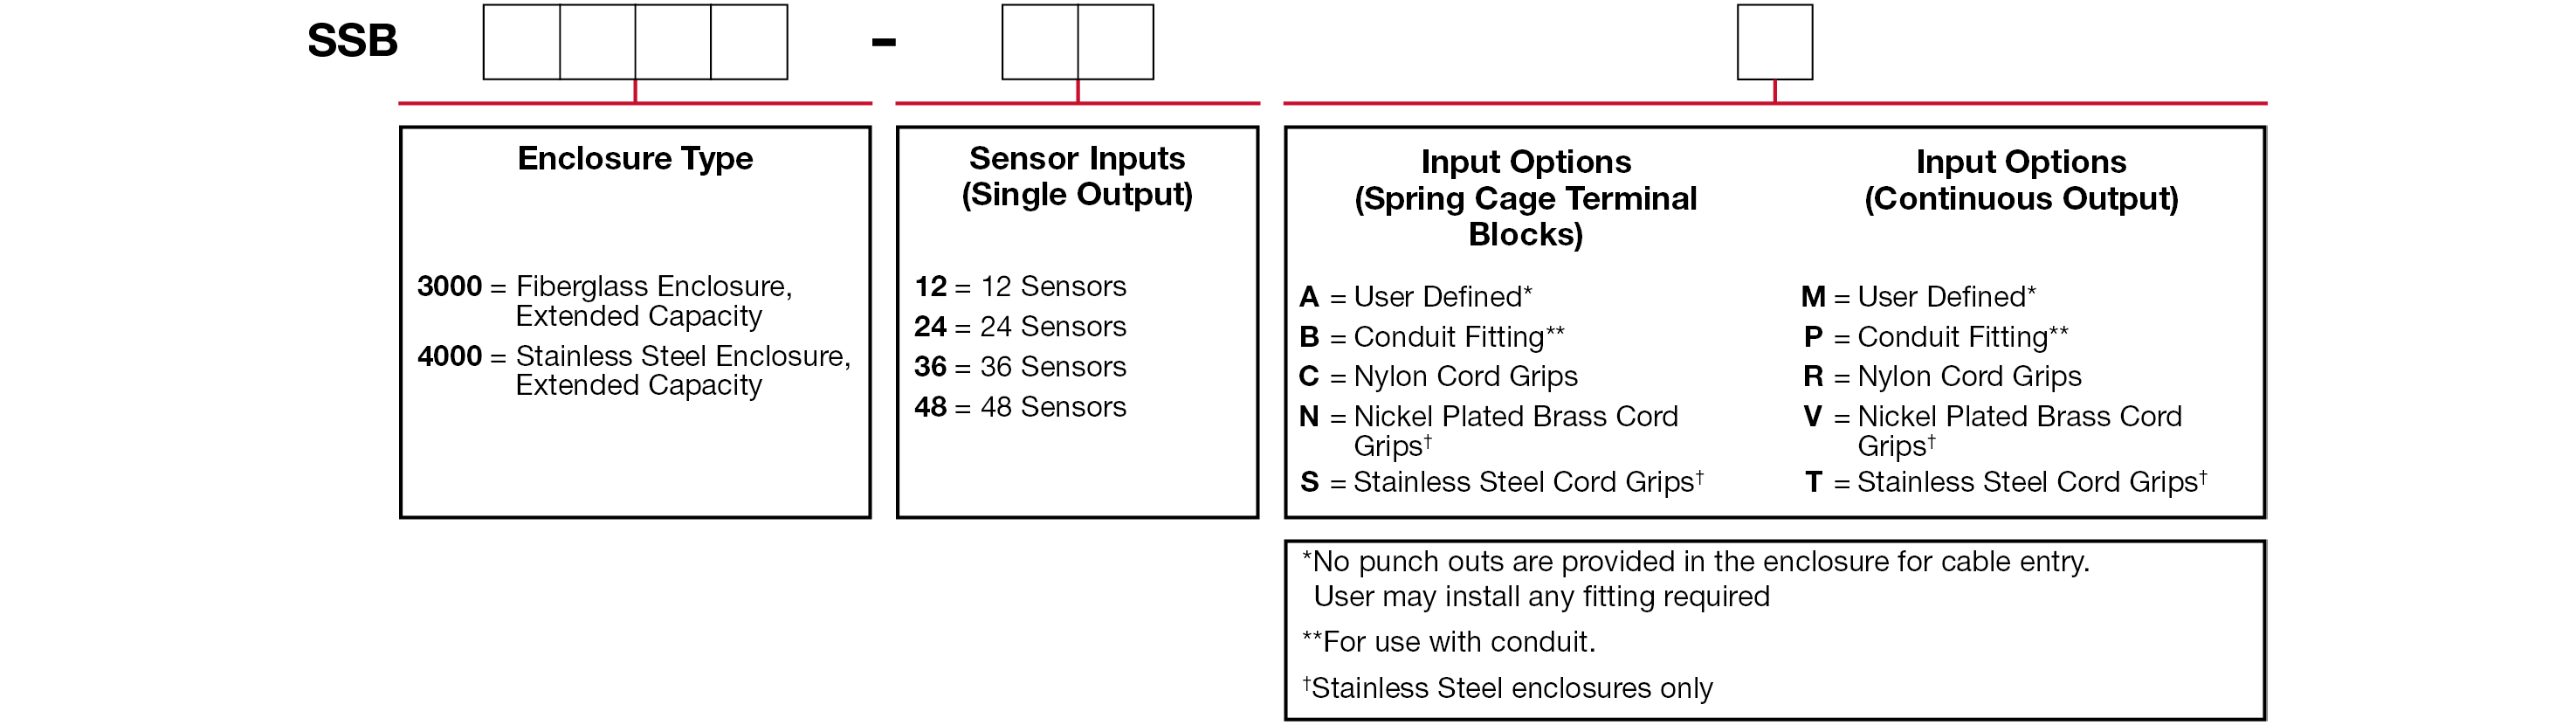 A chart showing configuration options to create a complete part number for ordering a CTC SSB4000 enclosure.